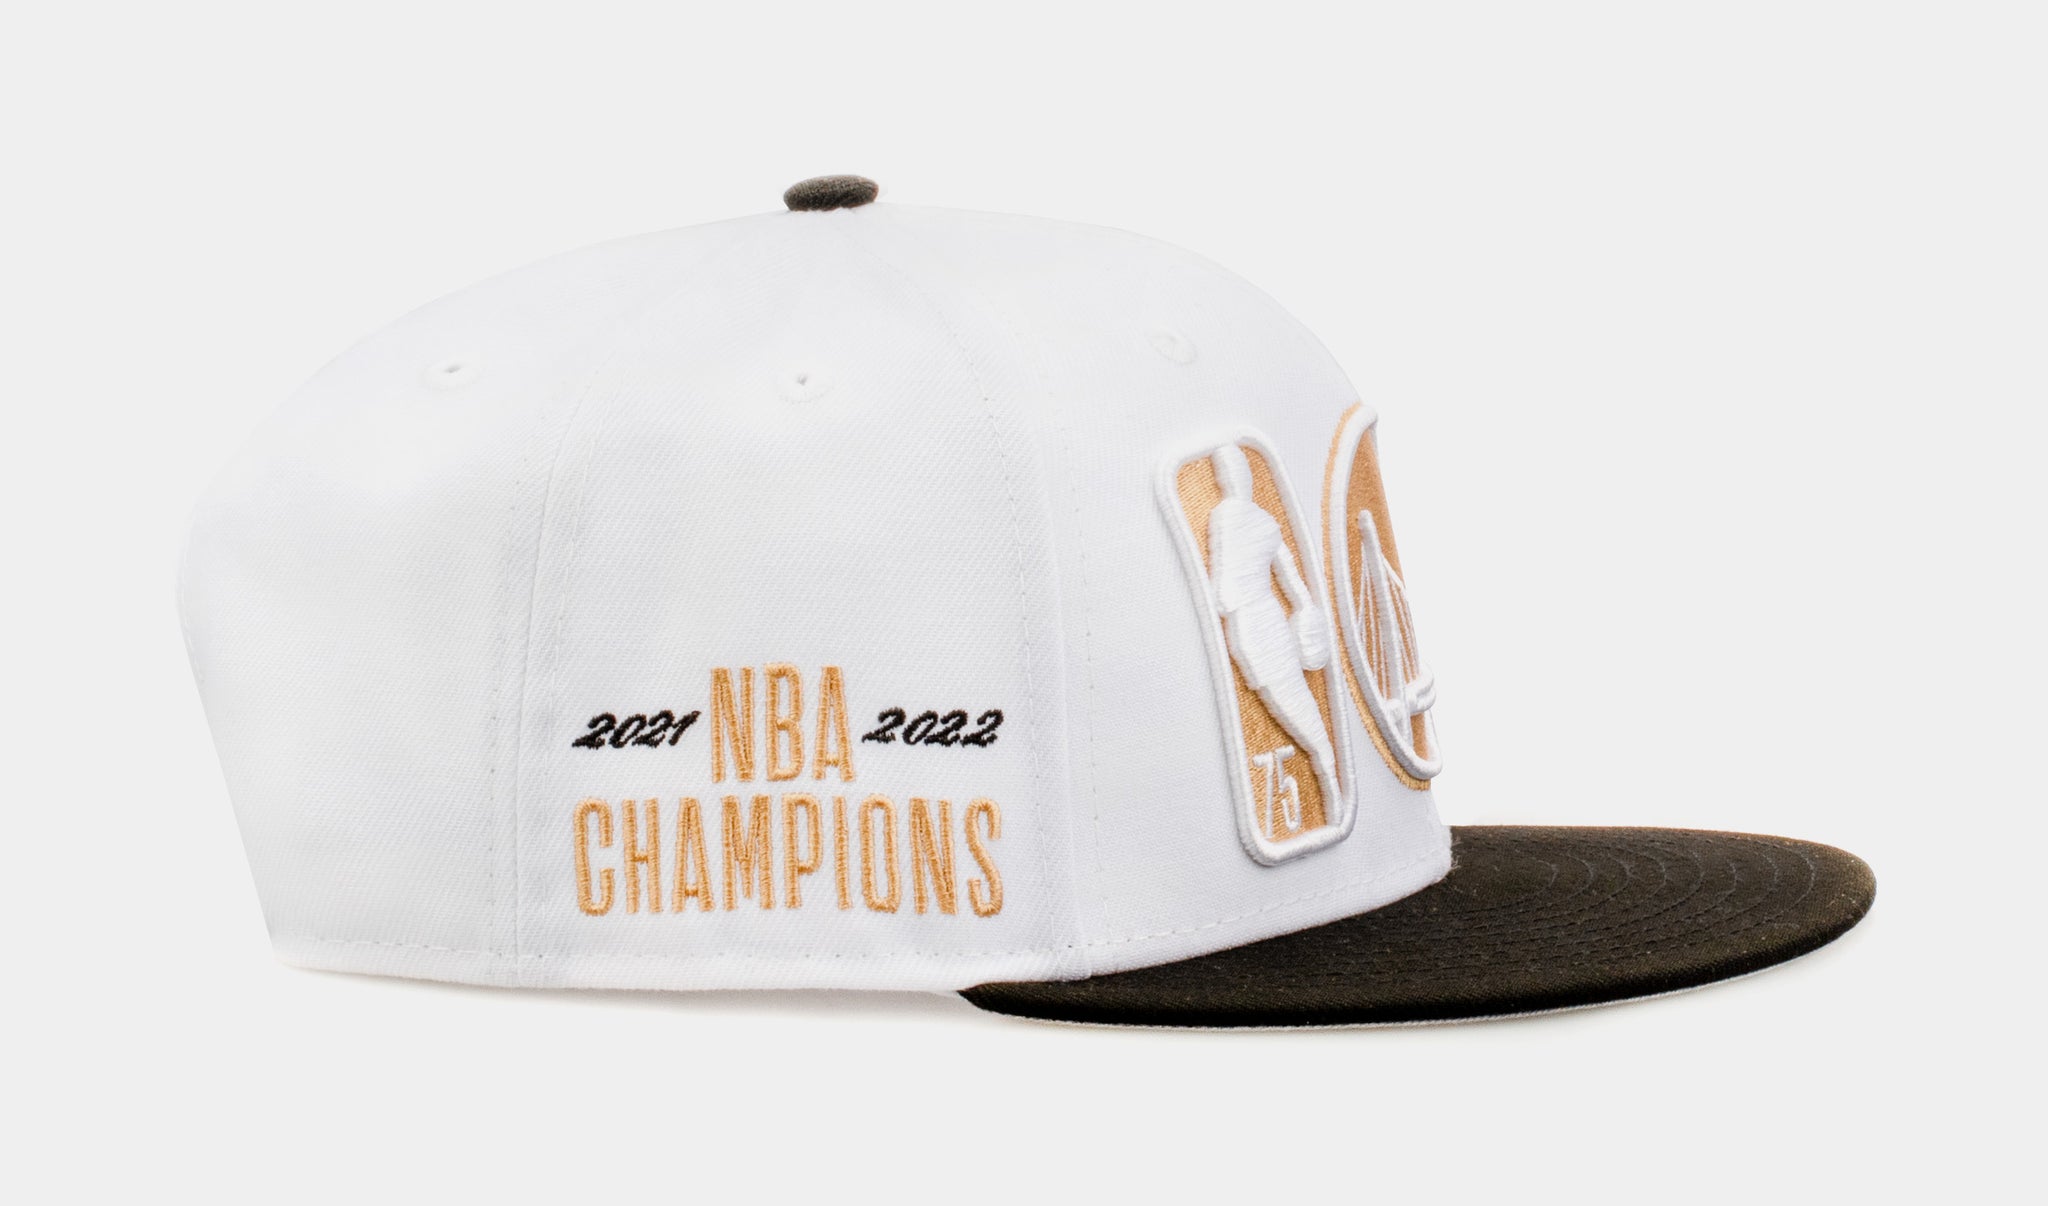 NEW ERA: BAGS AND ACCESSORIES, NEW ERA GOLDEN STATE WARRIORS